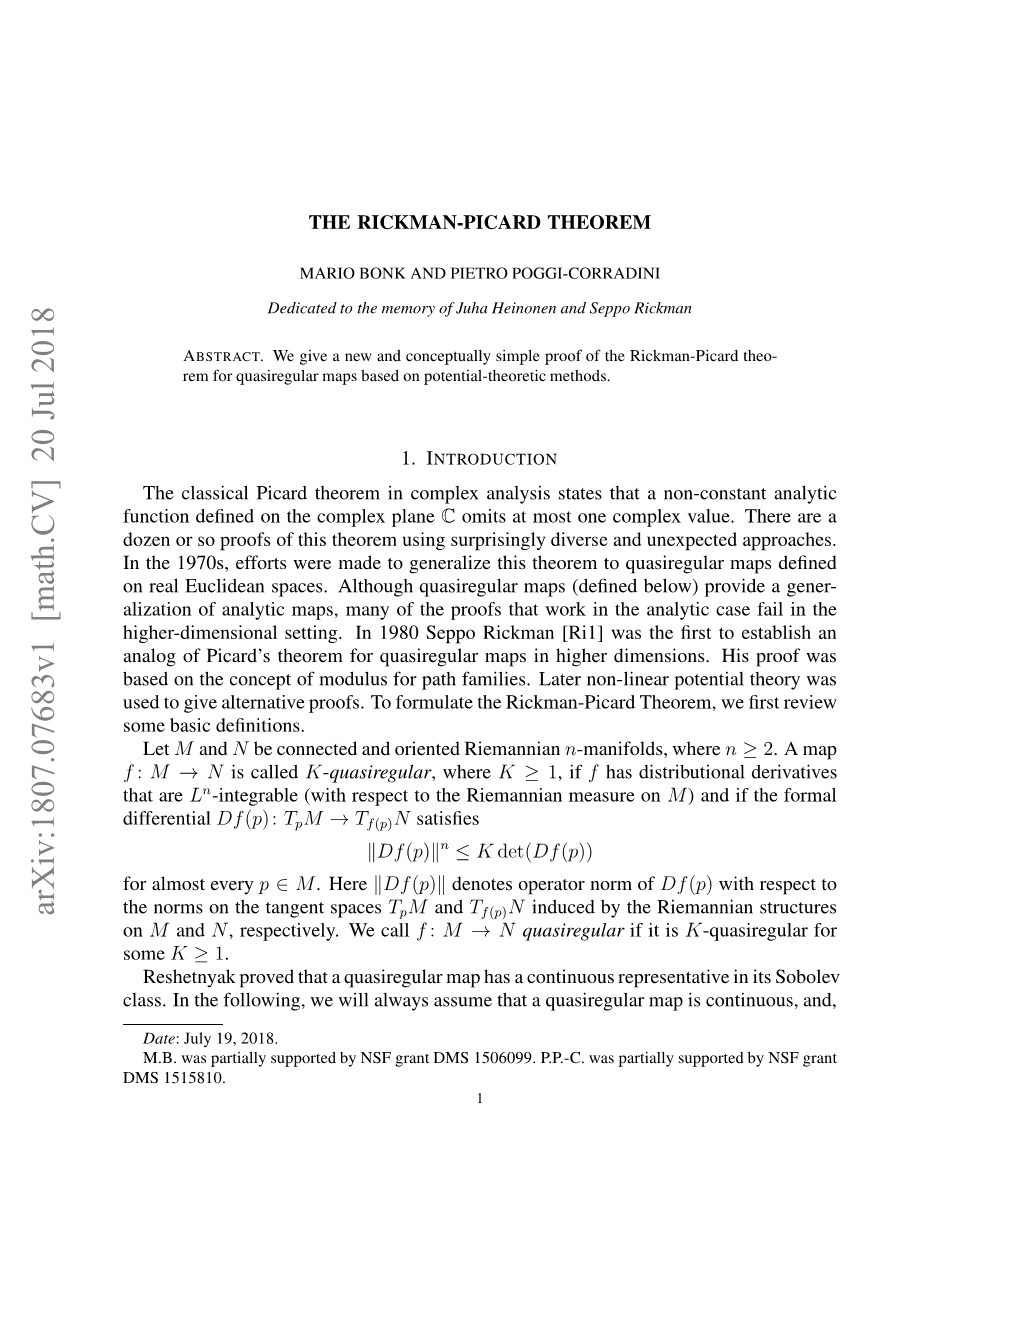 Arxiv:1807.07683V1 [Math.CV] 20 Jul 2018 Htare That F Differential Ucindﬁe Ntecmlxplane Complex the on Deﬁned Function Ae Ntecneto Ouu O Ahfmle.Ltrnon- Deﬁnitions